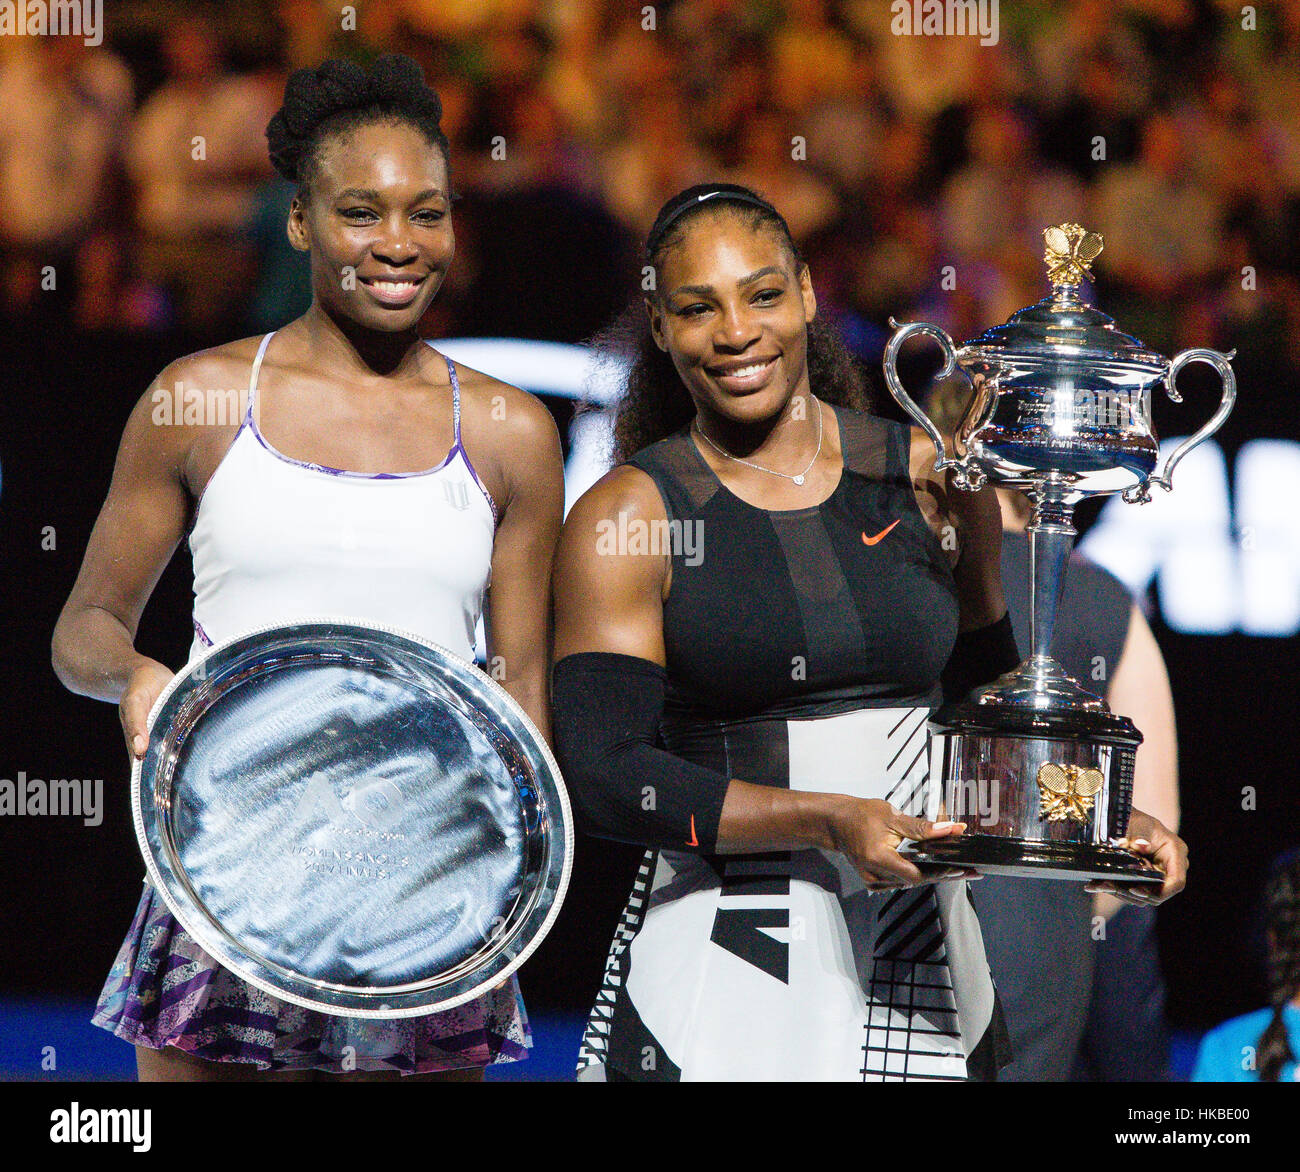 Melbourne, Australia. 29th Jan, 2017. Serena Williams of the USA won her  23rd Grand Slam title at the 2017 Australian Open against her sister Venus  Williams and presents the Daphne Akhurst Memorial